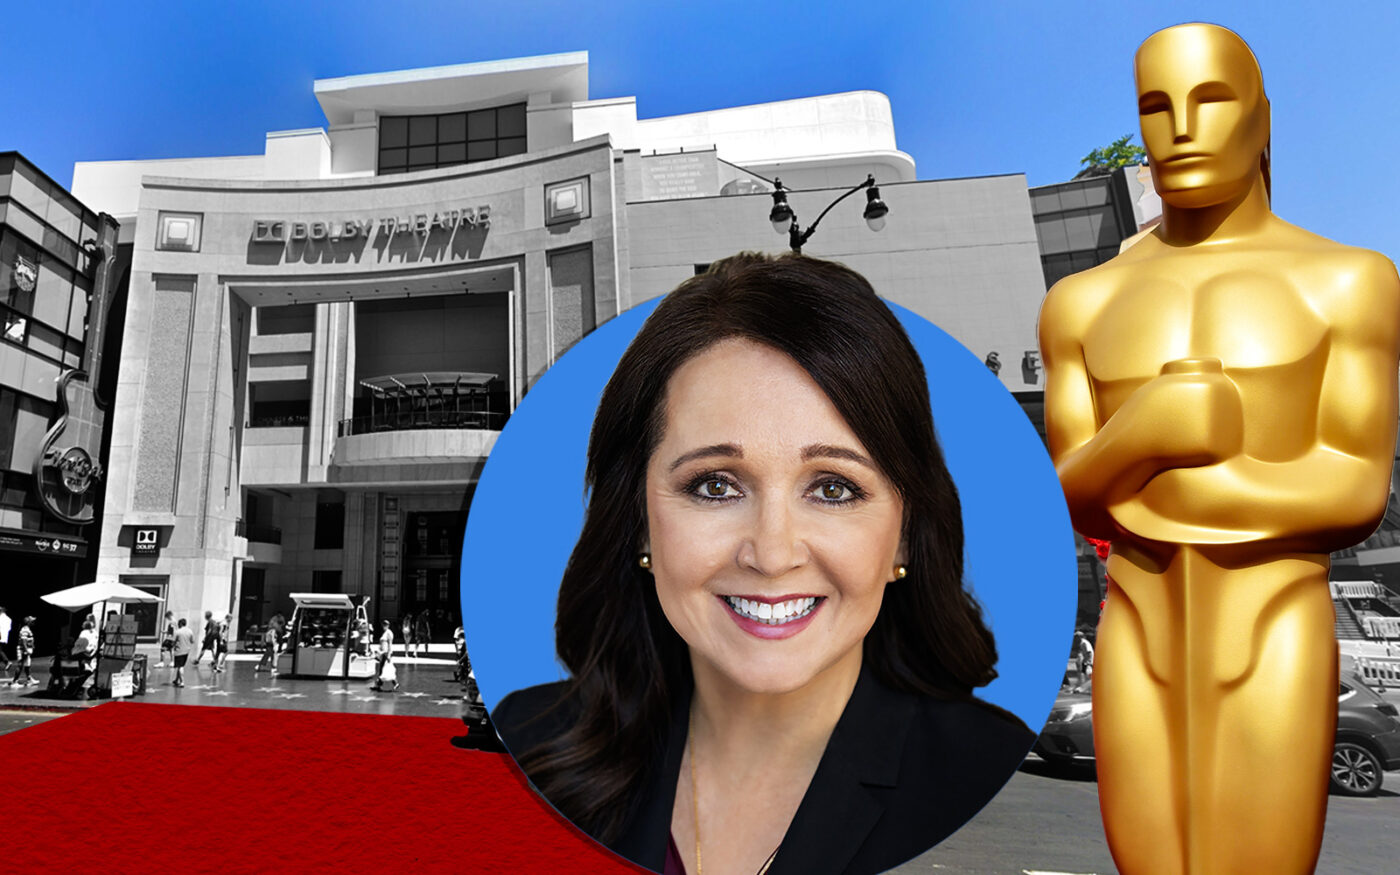 CalPERS Puts Dolby Theatre, Site of the Oscars, Up for Sale